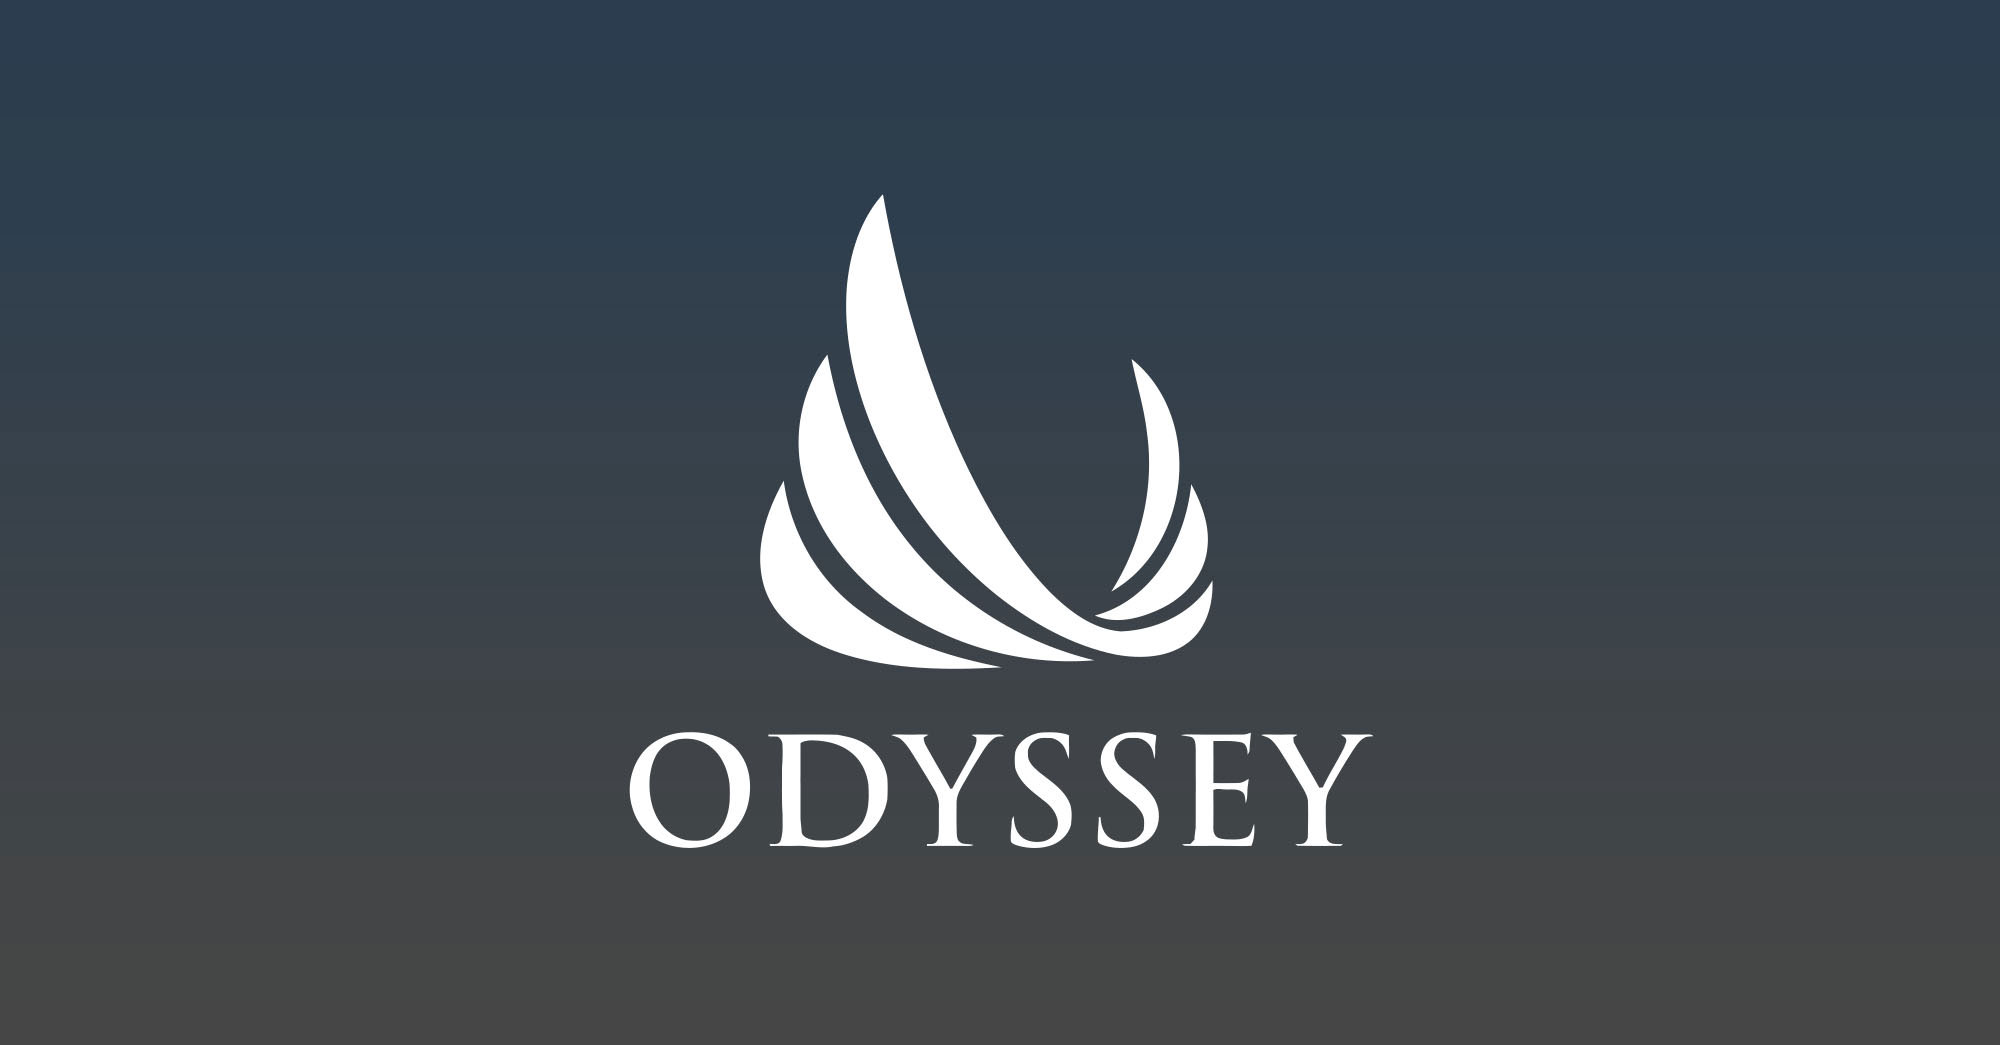 Global Shares and Odyssey Trust Announce Partnership in Canada